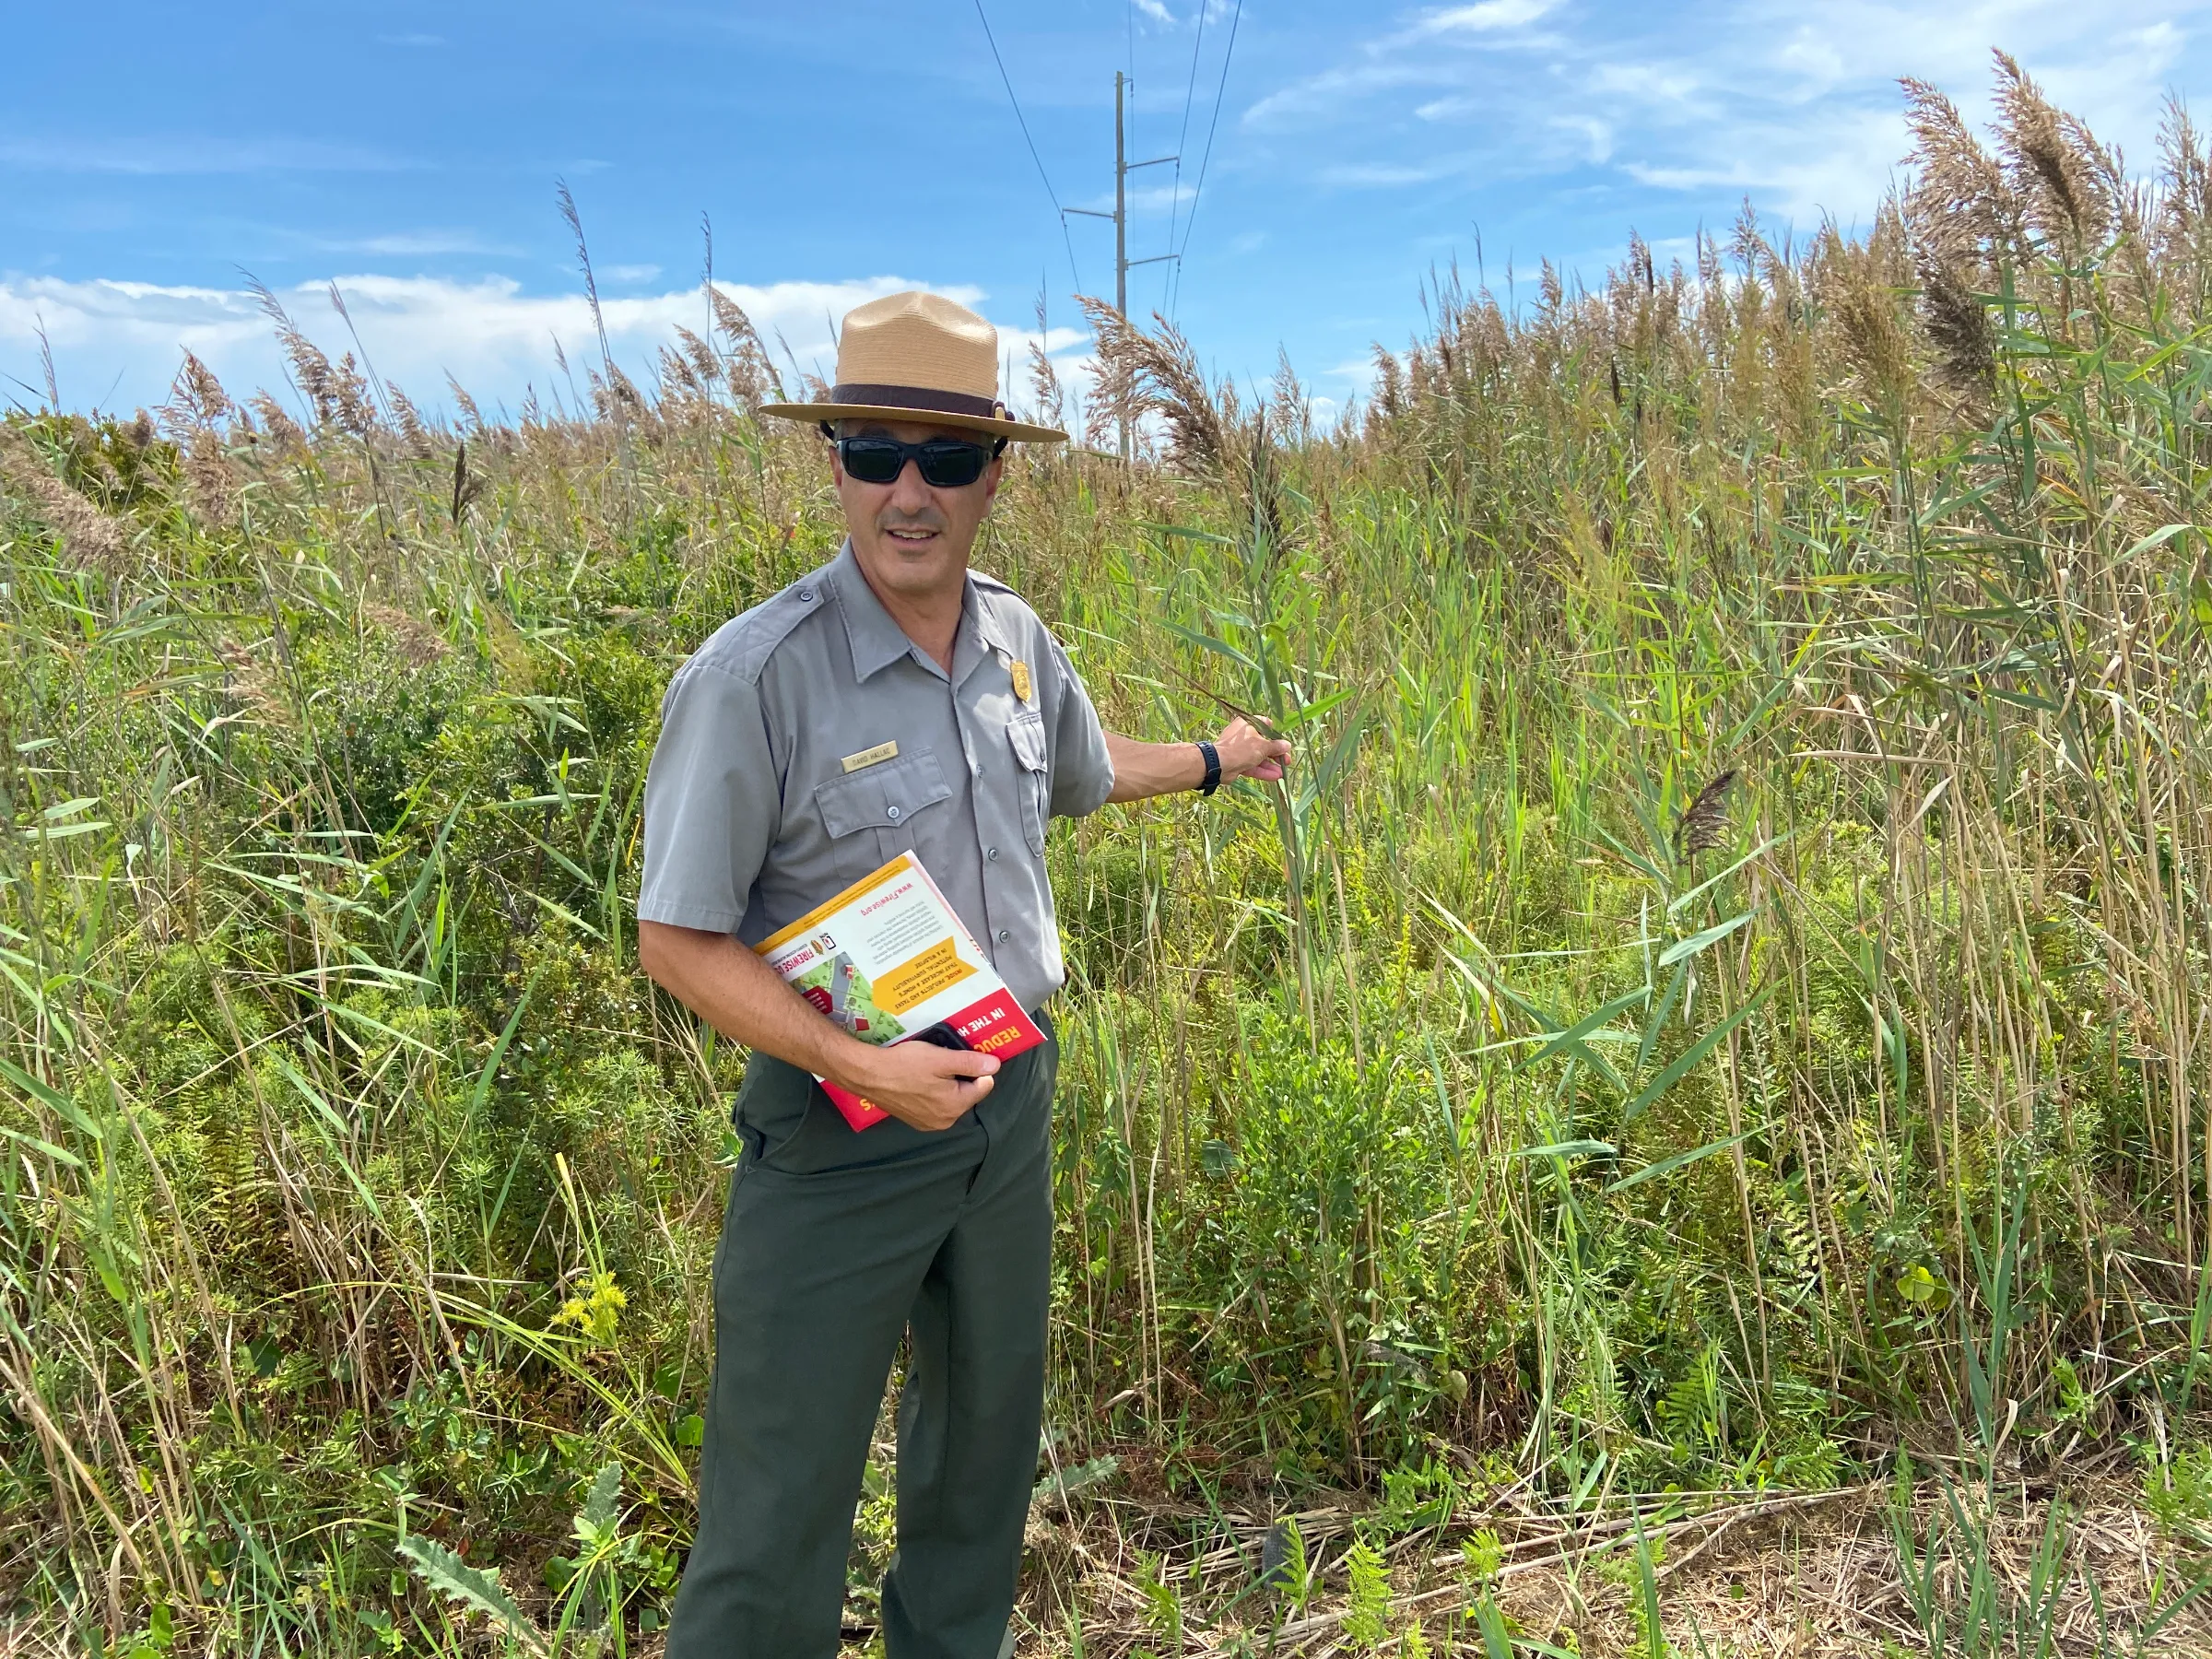 David Hallac, superintendent of the National Parks of Eastern North Carolina, grasps a reed -  which can be flammable if not maintained properly – near south Nags Head, North Carolina, September 6, 2022